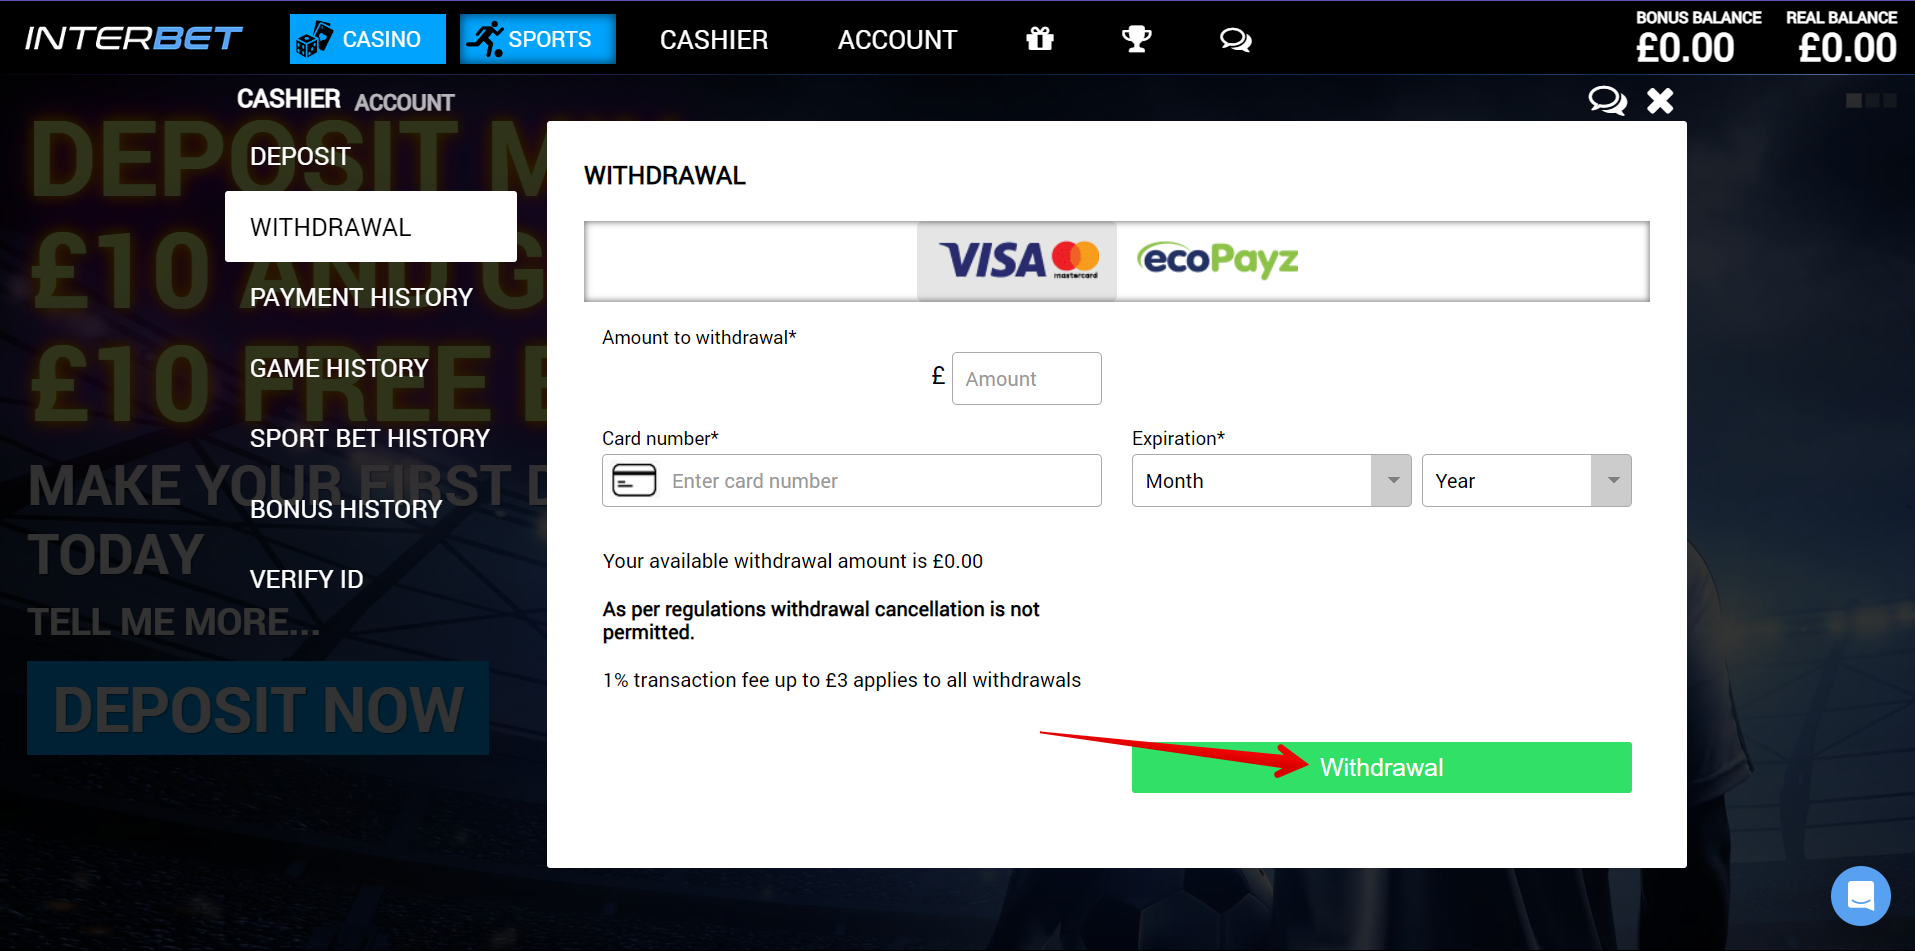 Click on “Withdrawal” to complete the process